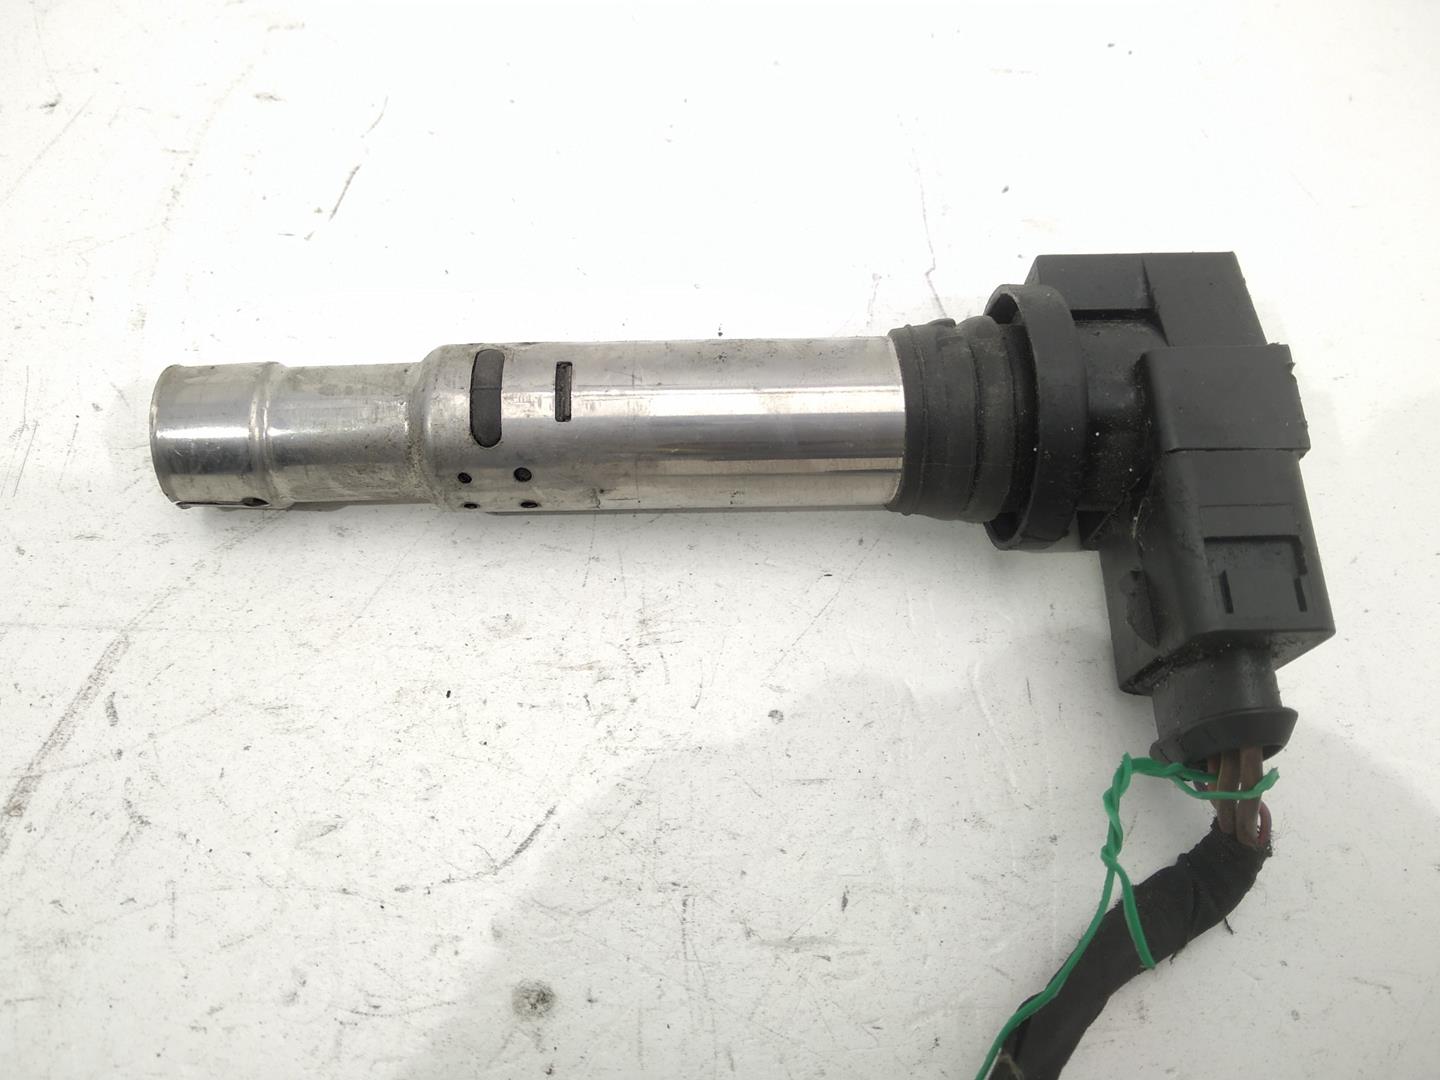 SEAT Ibiza 3 generation (2002-2008) High Voltage Ignition Coil 036905715, 036905715, 036905715 24512815